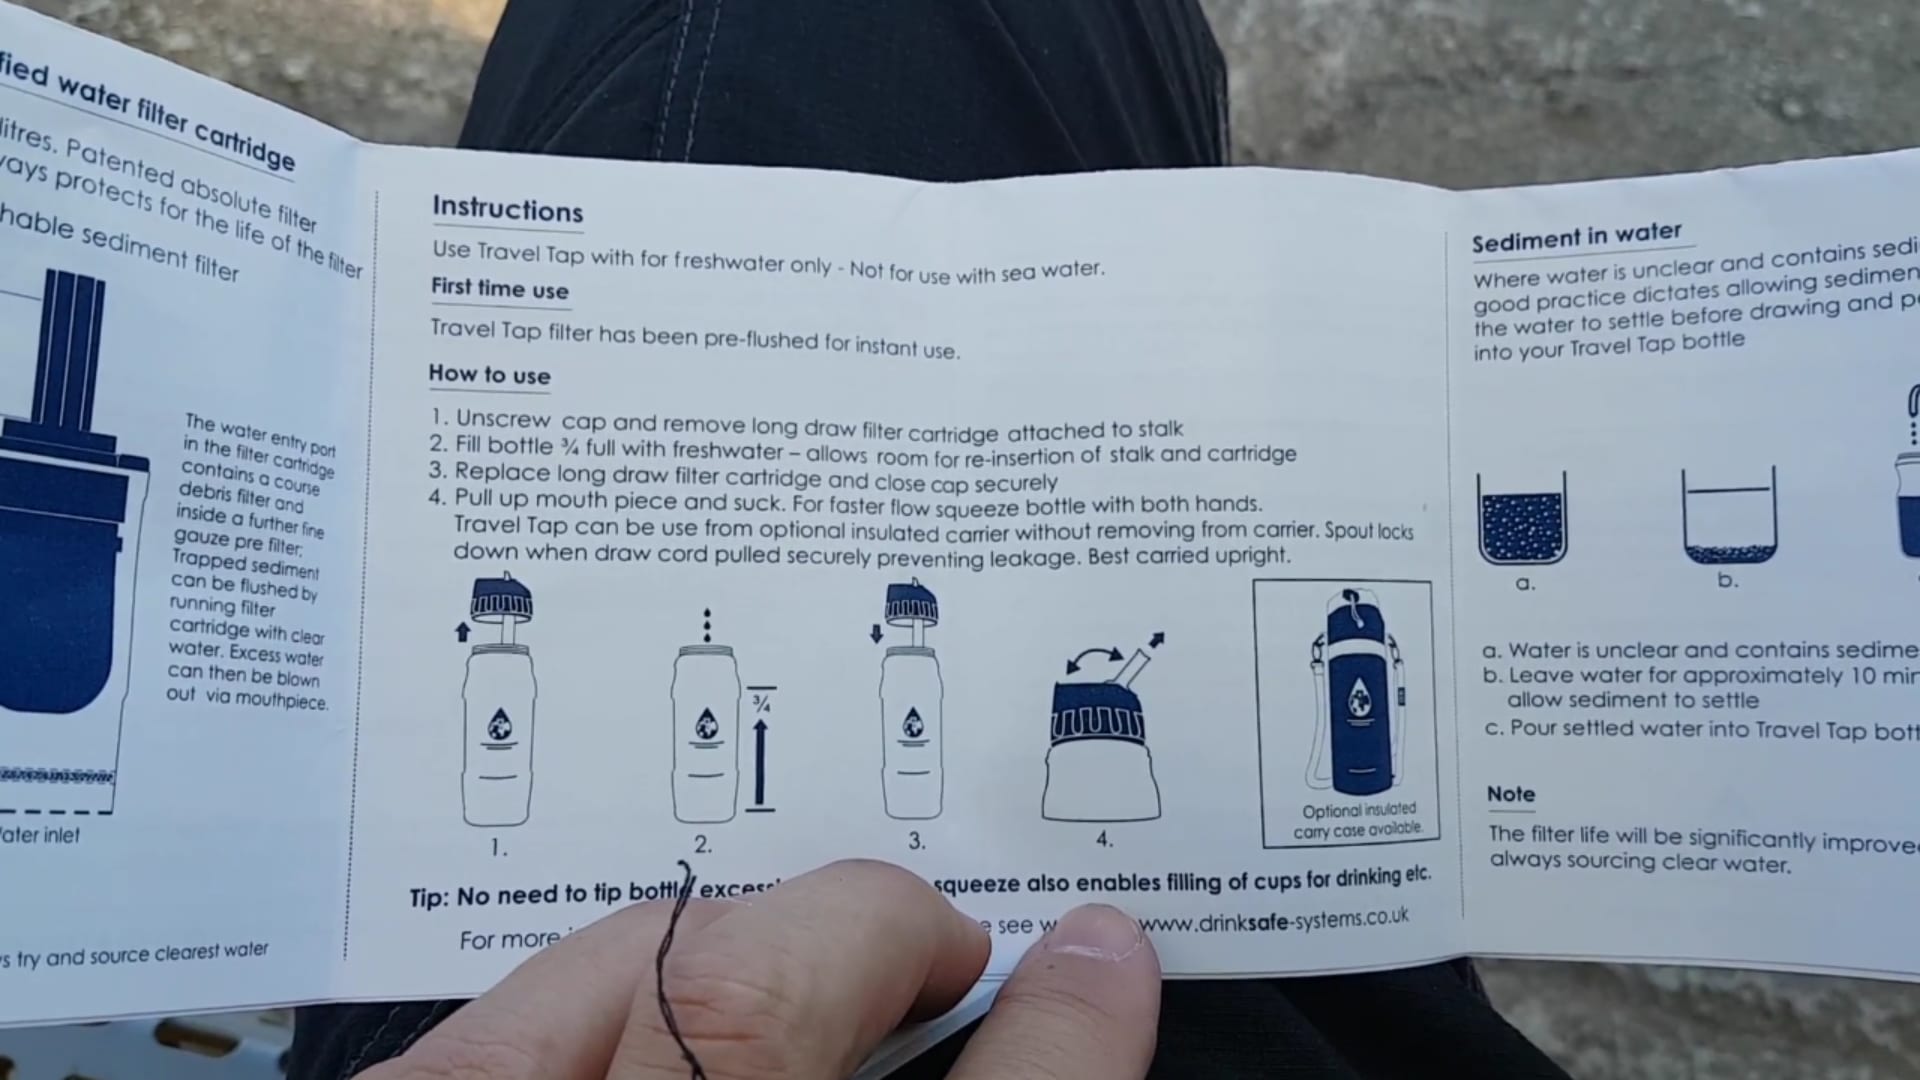 The instructions from the water bottle for travel with filter